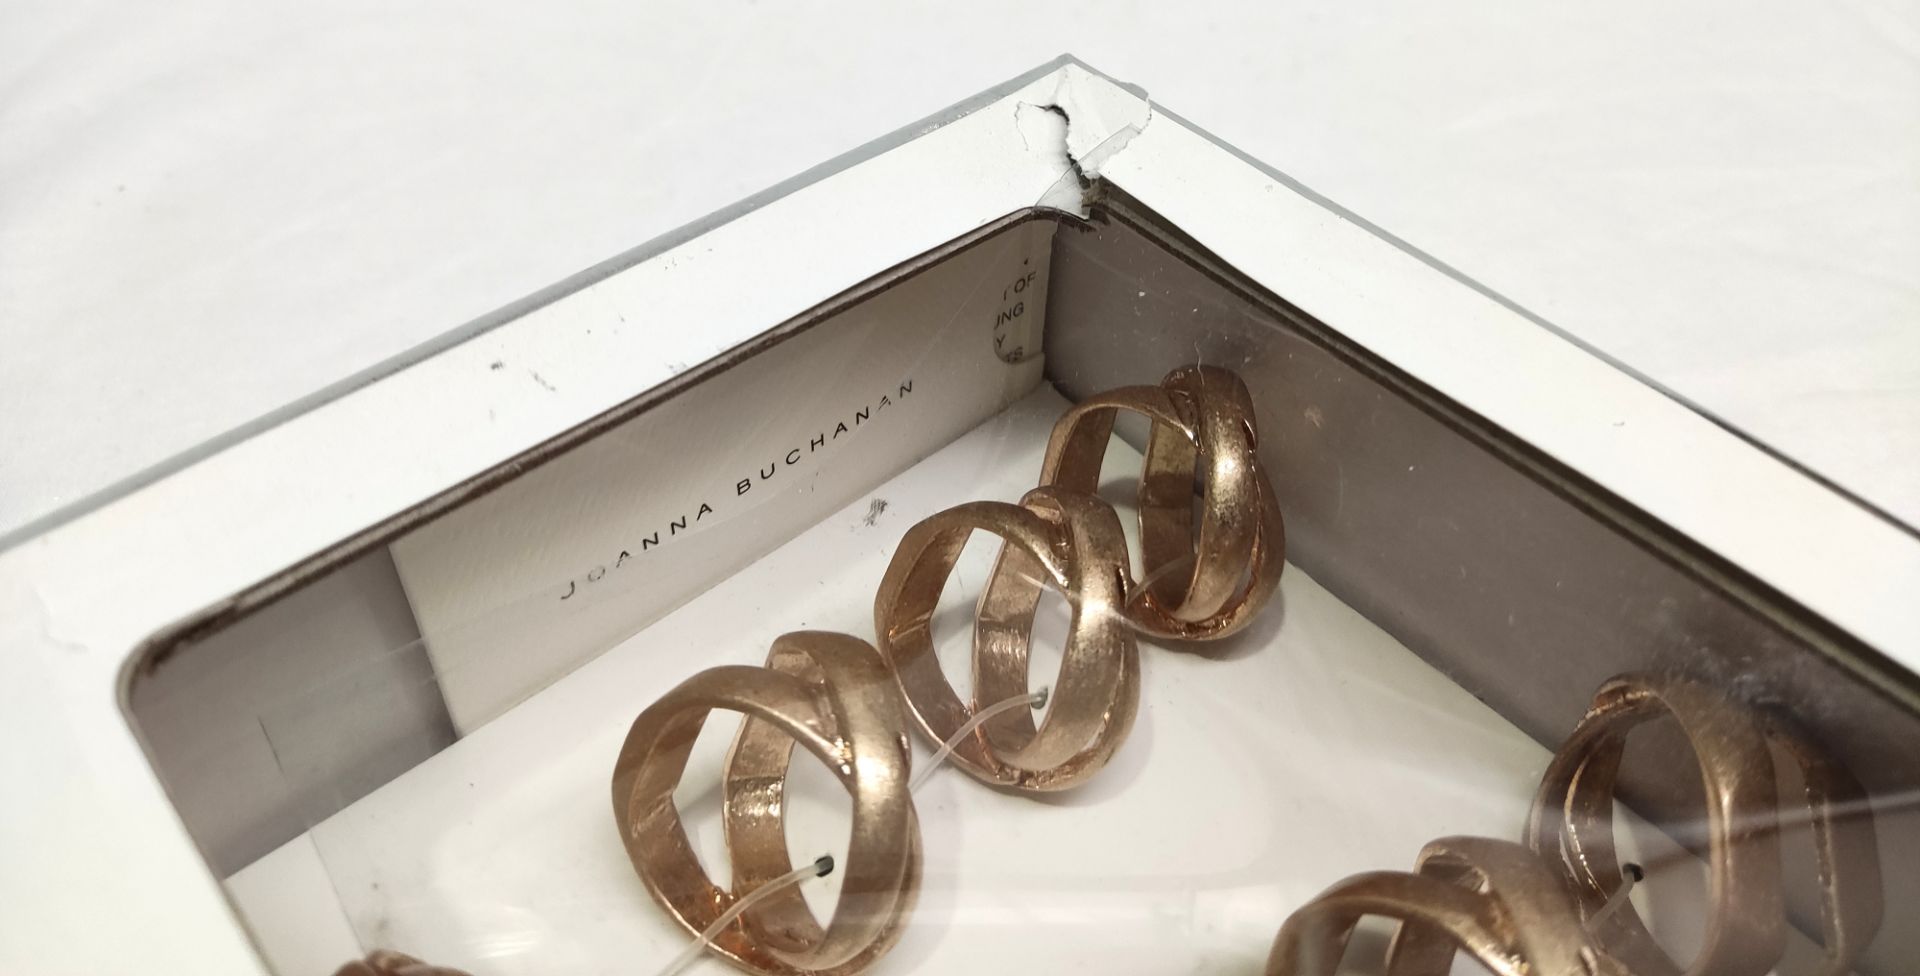 1 x JOANNA BUCHANAN Knot Placecard Holders - Set Of 8 - New/Boxed - Original RRP £168 - Ref: - Image 16 of 19